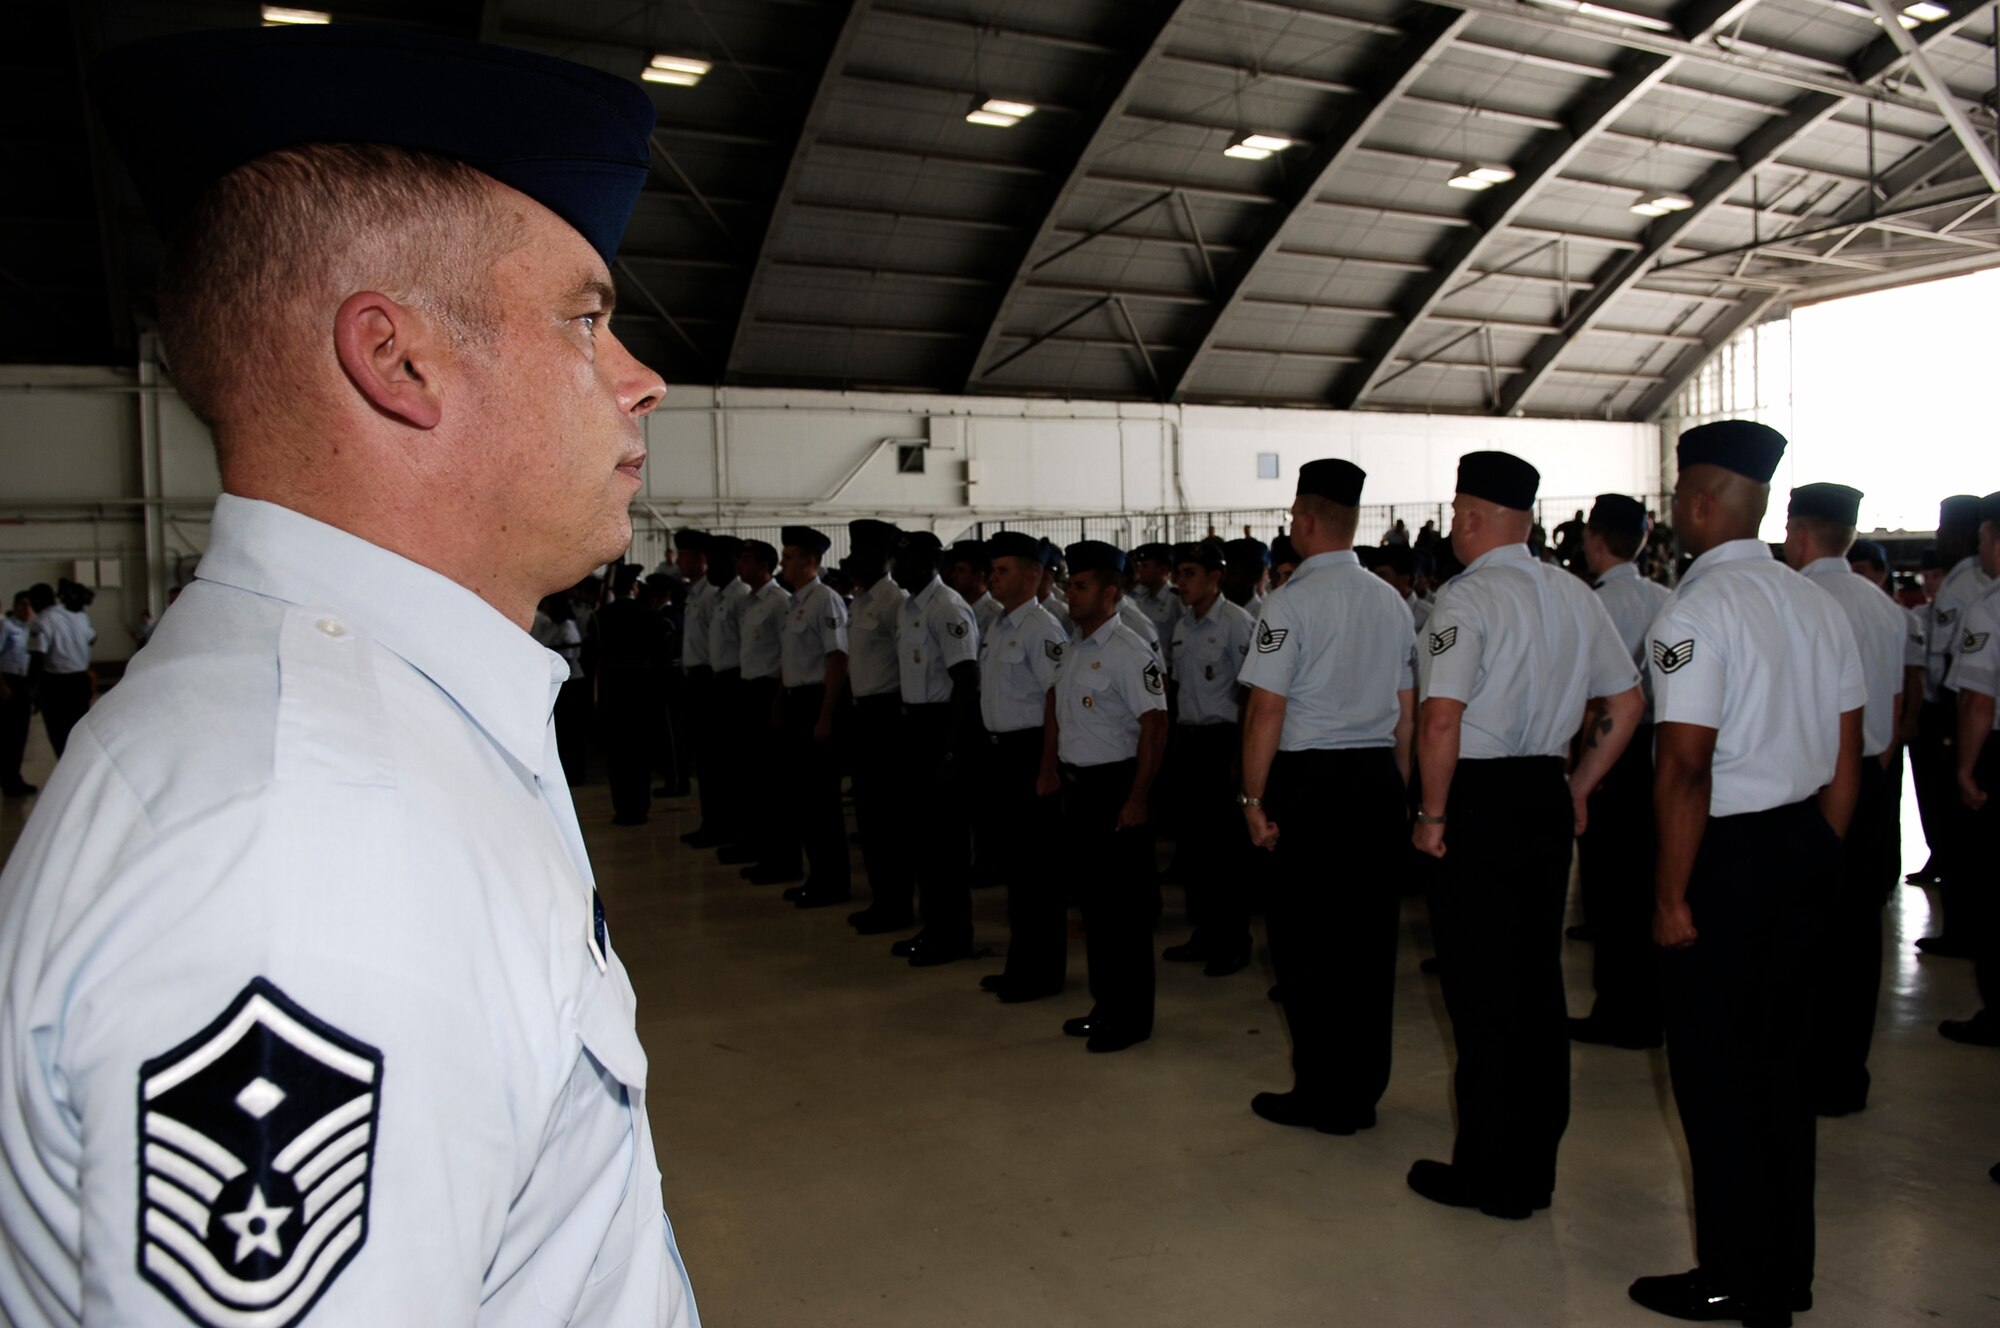 Master Sgt. Matthew Gadziala III, leads a formation at the 6th Air Mobility Wing Change of command ceremony Monday. (U.S. Air Force photo/Tech. Sgt. Sean White)
